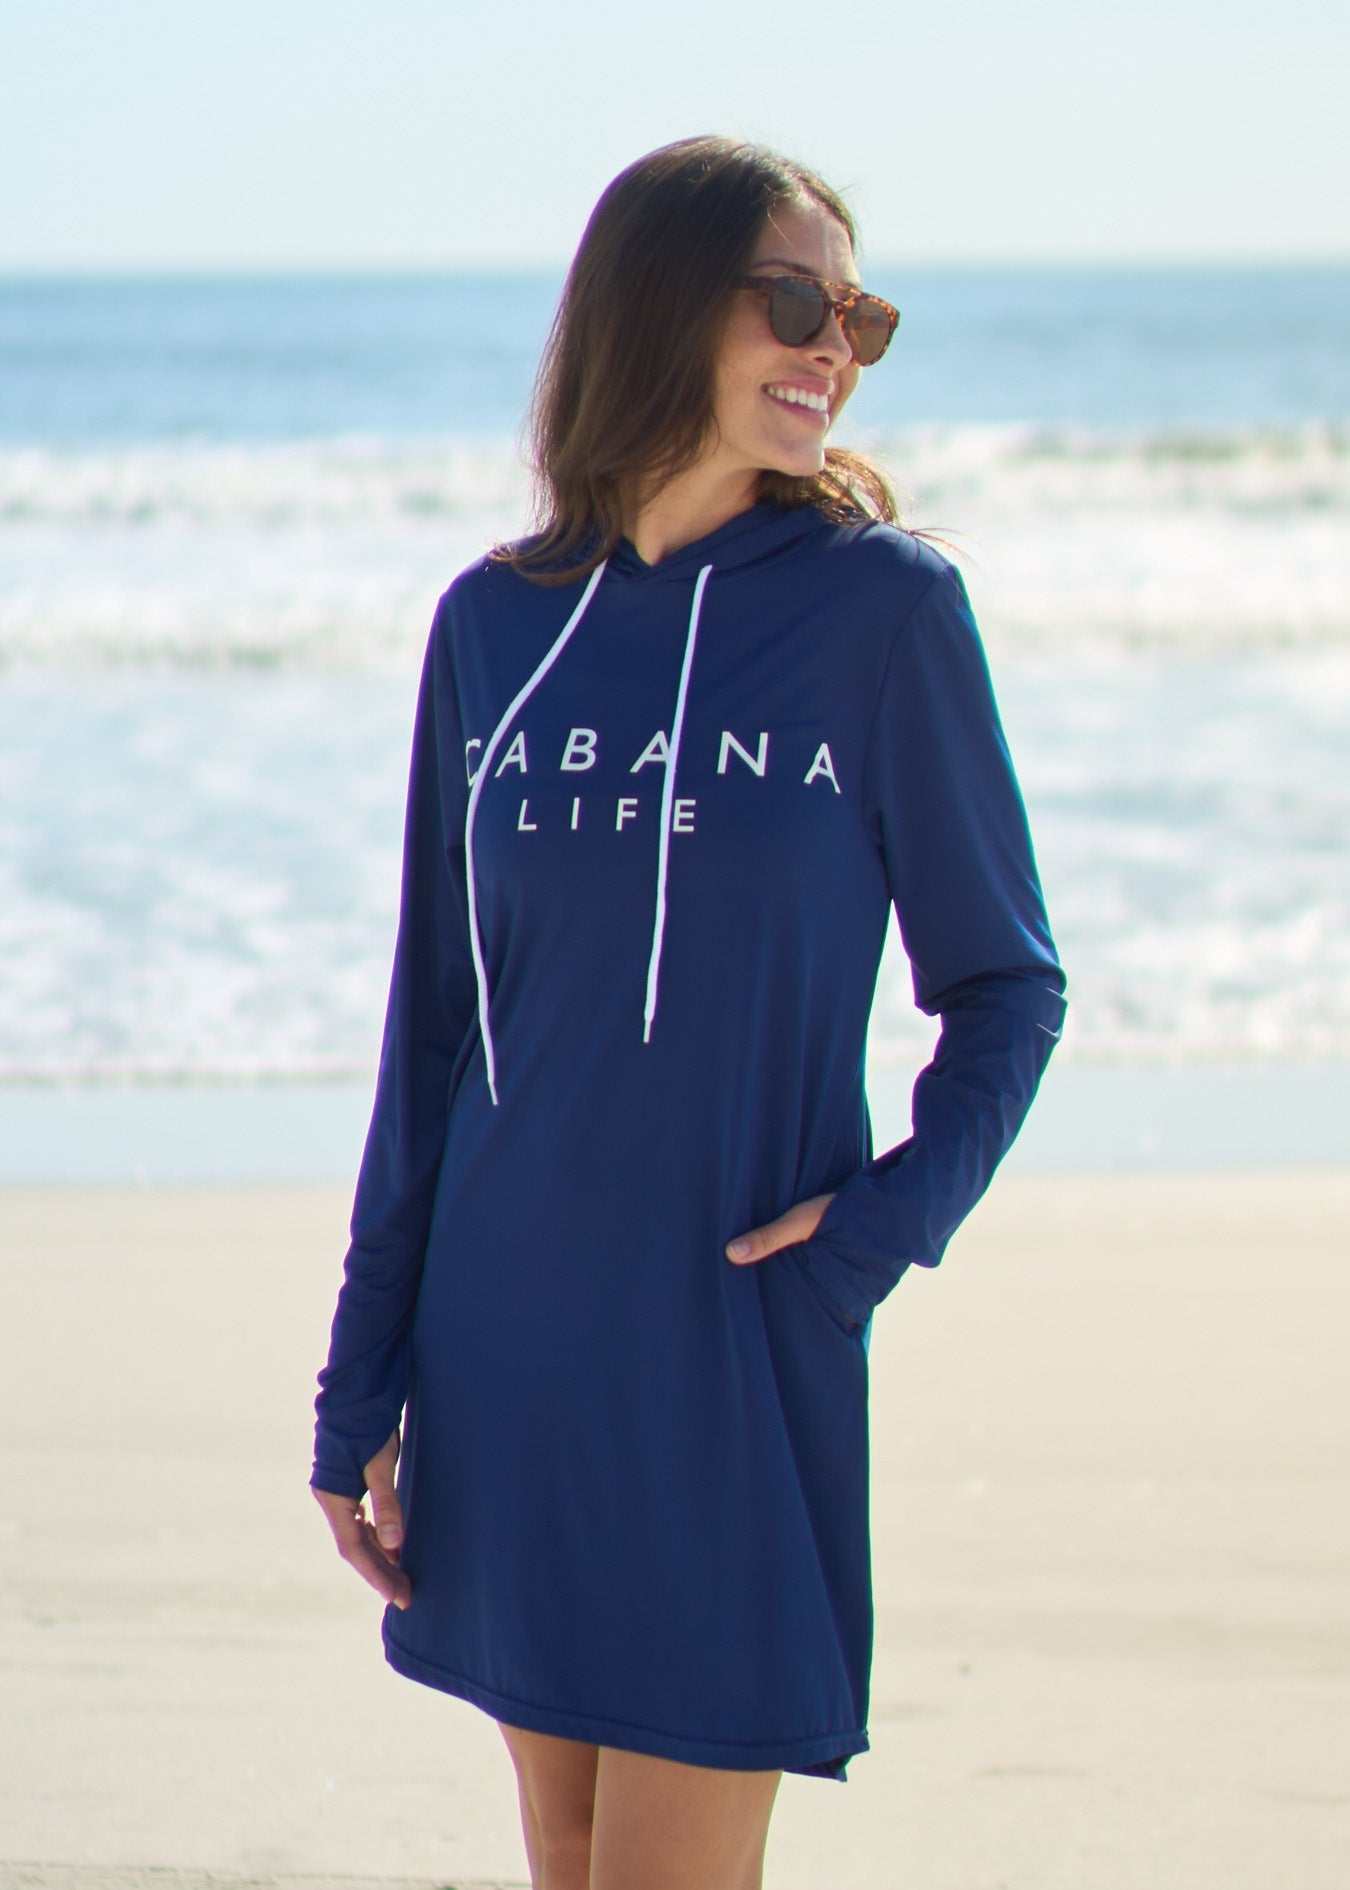 A woman smiling and looking to the side wearing the Navy Cabana Life Hoodie Dress with hand in pocket on the beach.